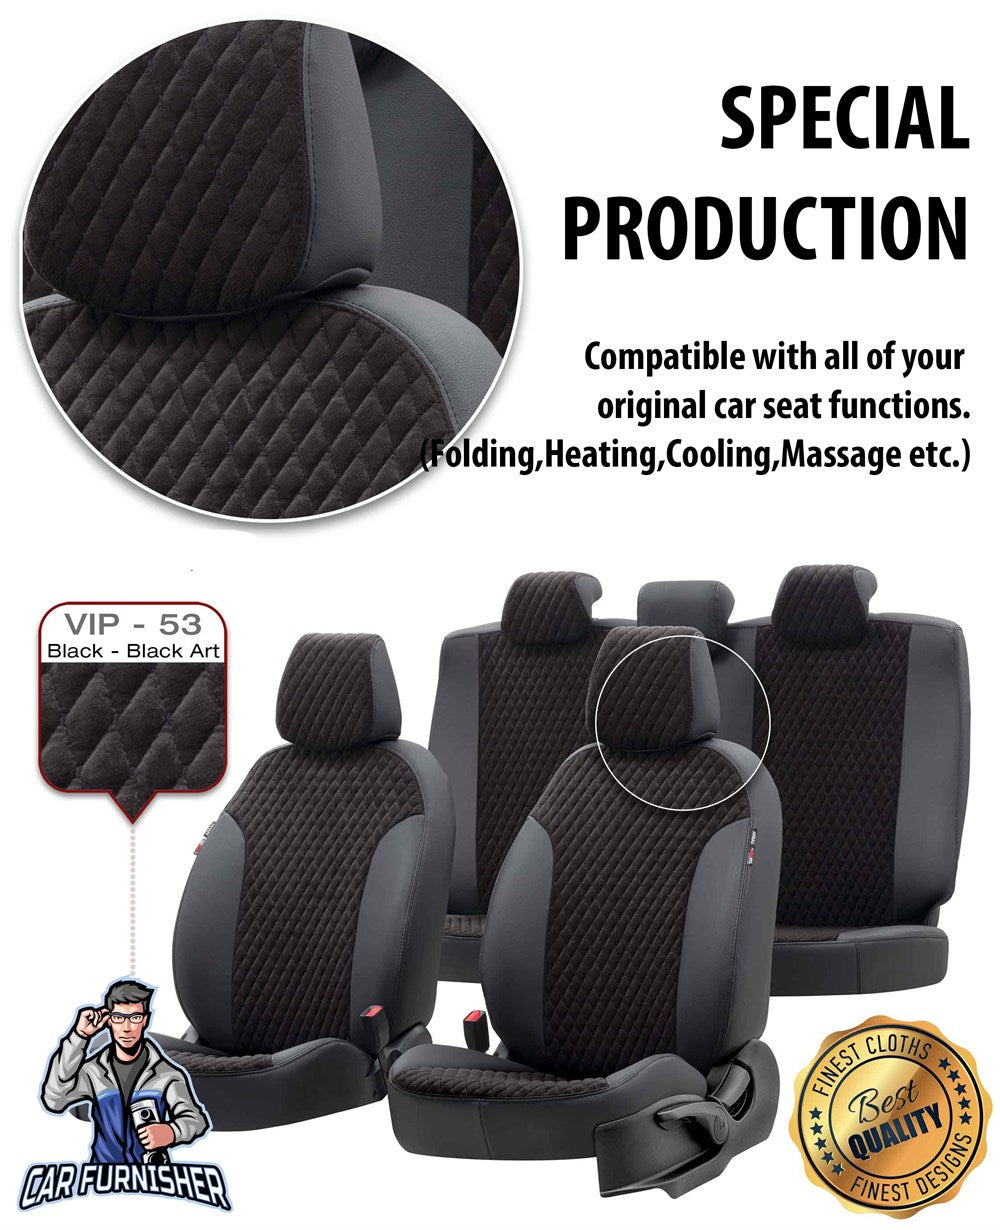 Landrover Freelander Car Seat Covers 1998-2012 Amsterdam Feather Smoked Black Leather & Foal Feather